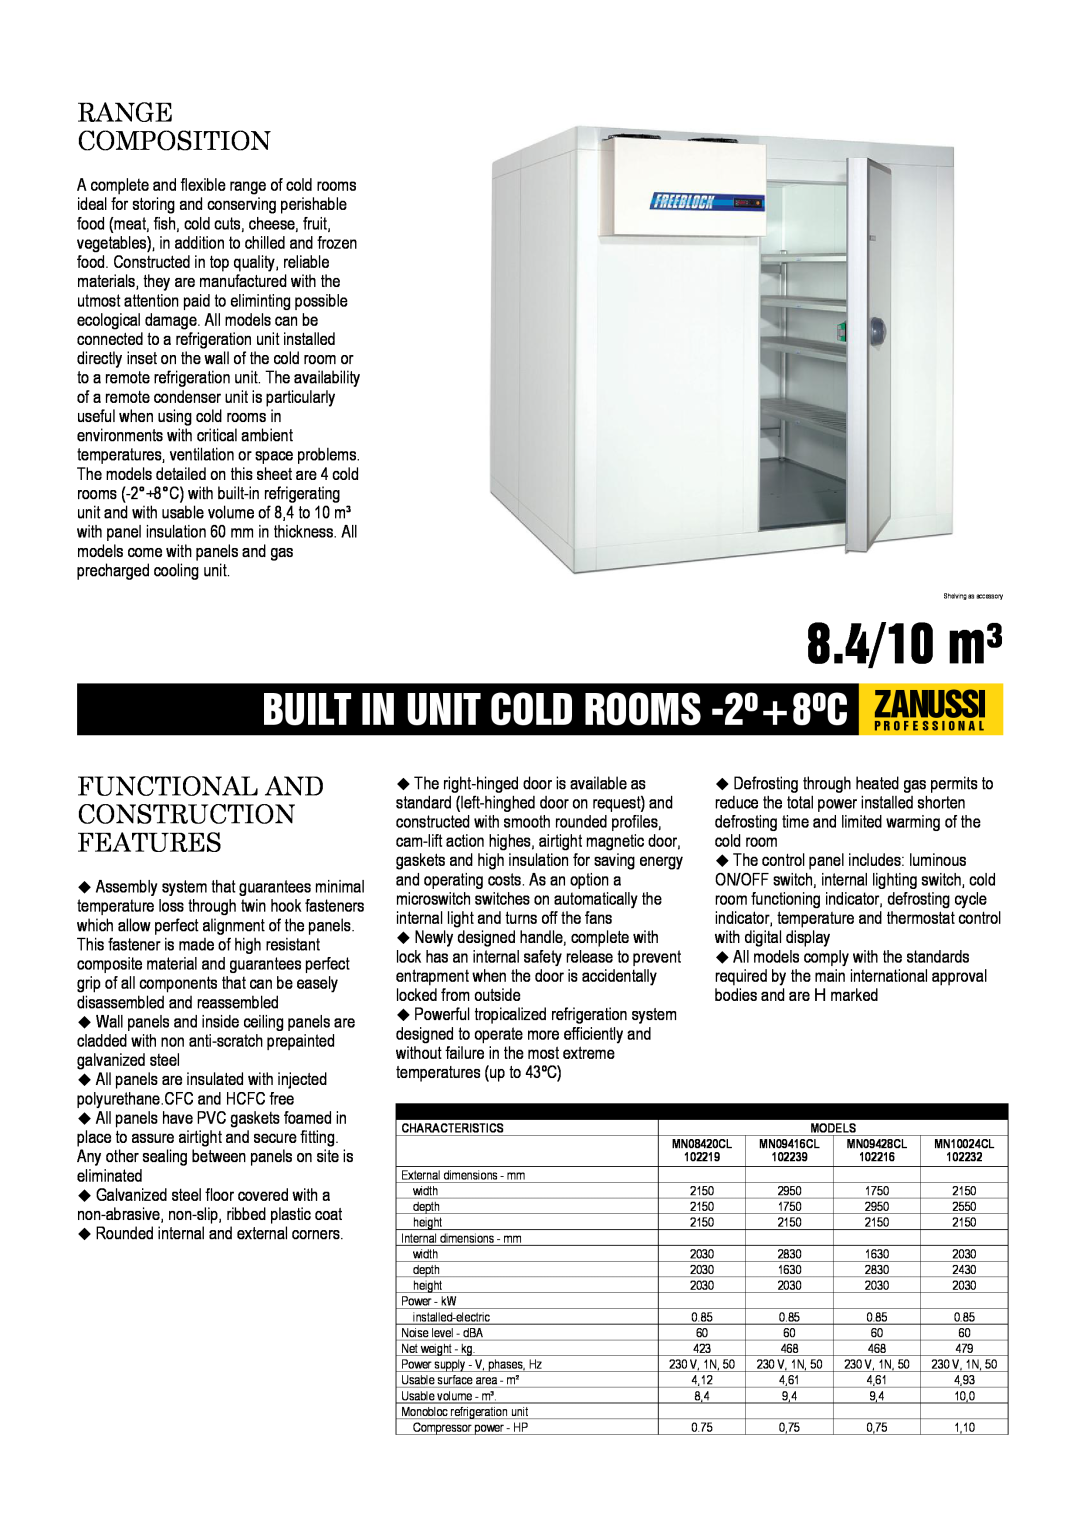 Zanussi MN10024CL, MN08420CL, MN09428CL dimensions 8.4/10 m³, Range Composition, Functional And Construction Features 